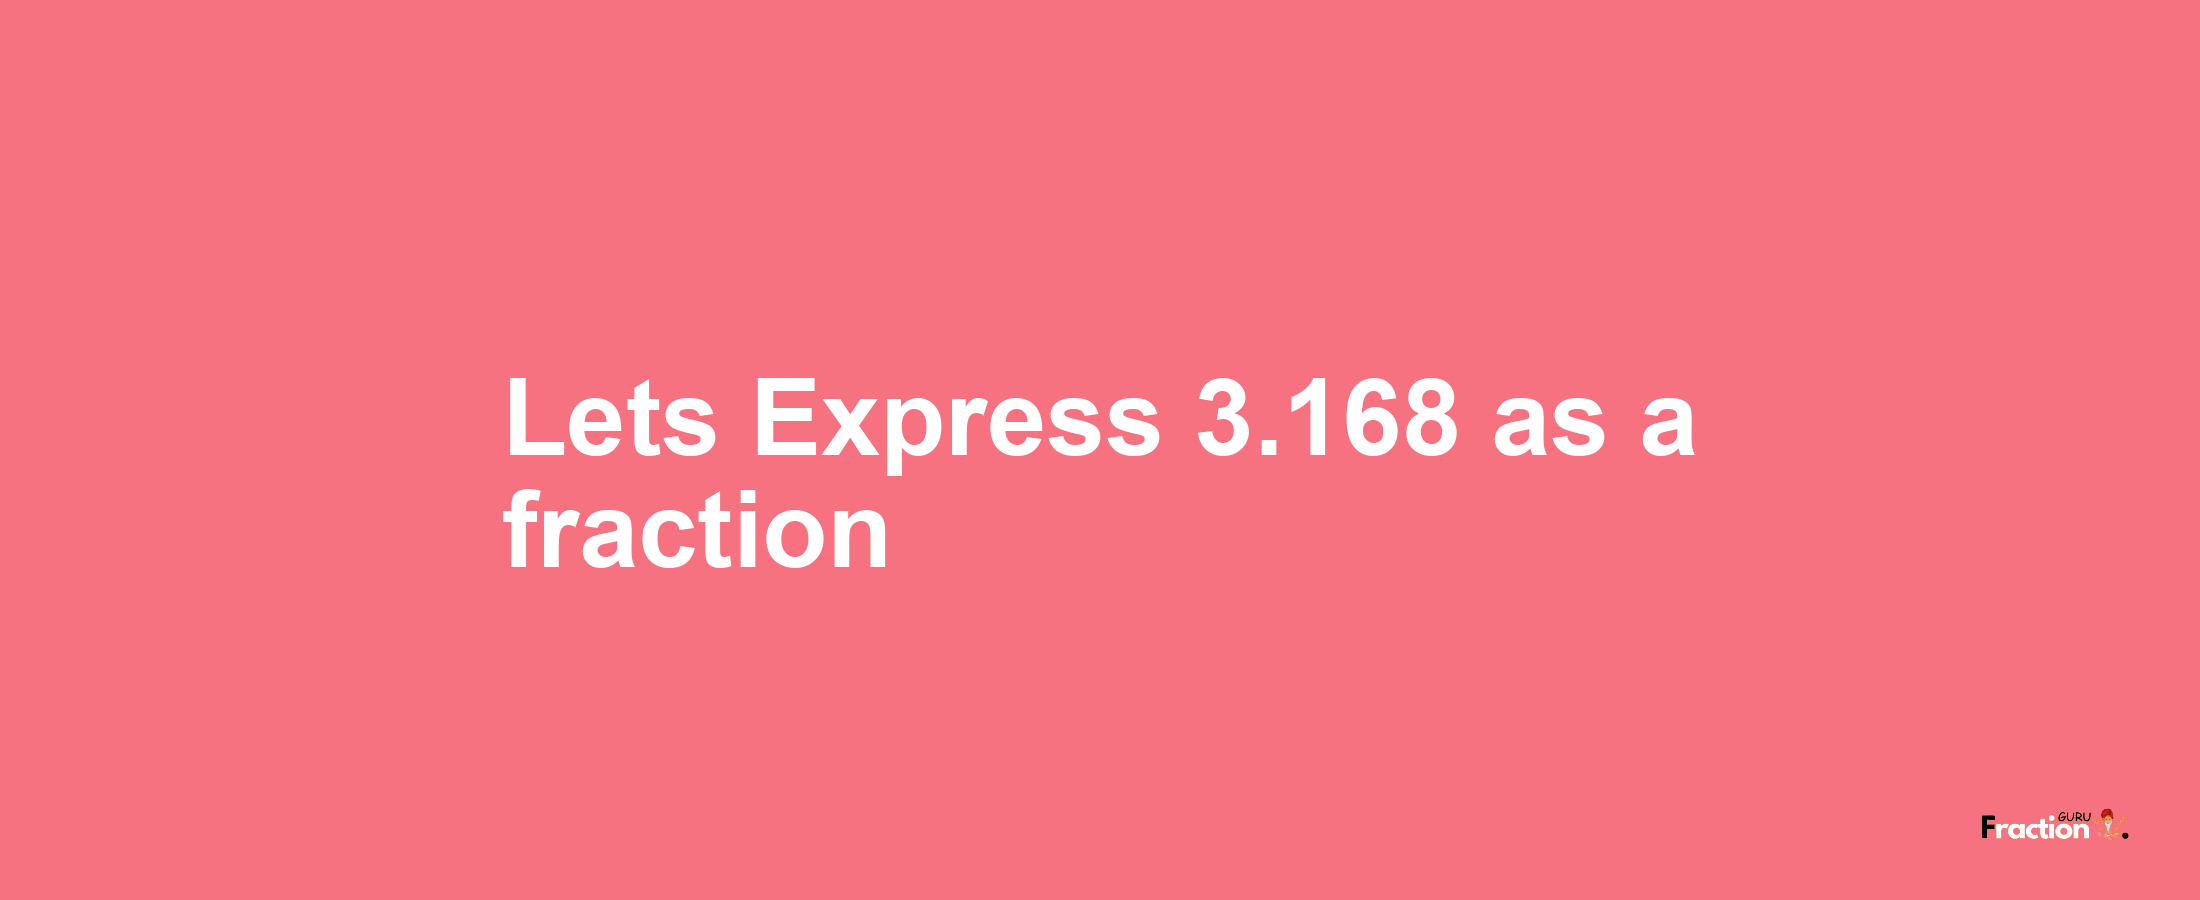 Lets Express 3.168 as afraction